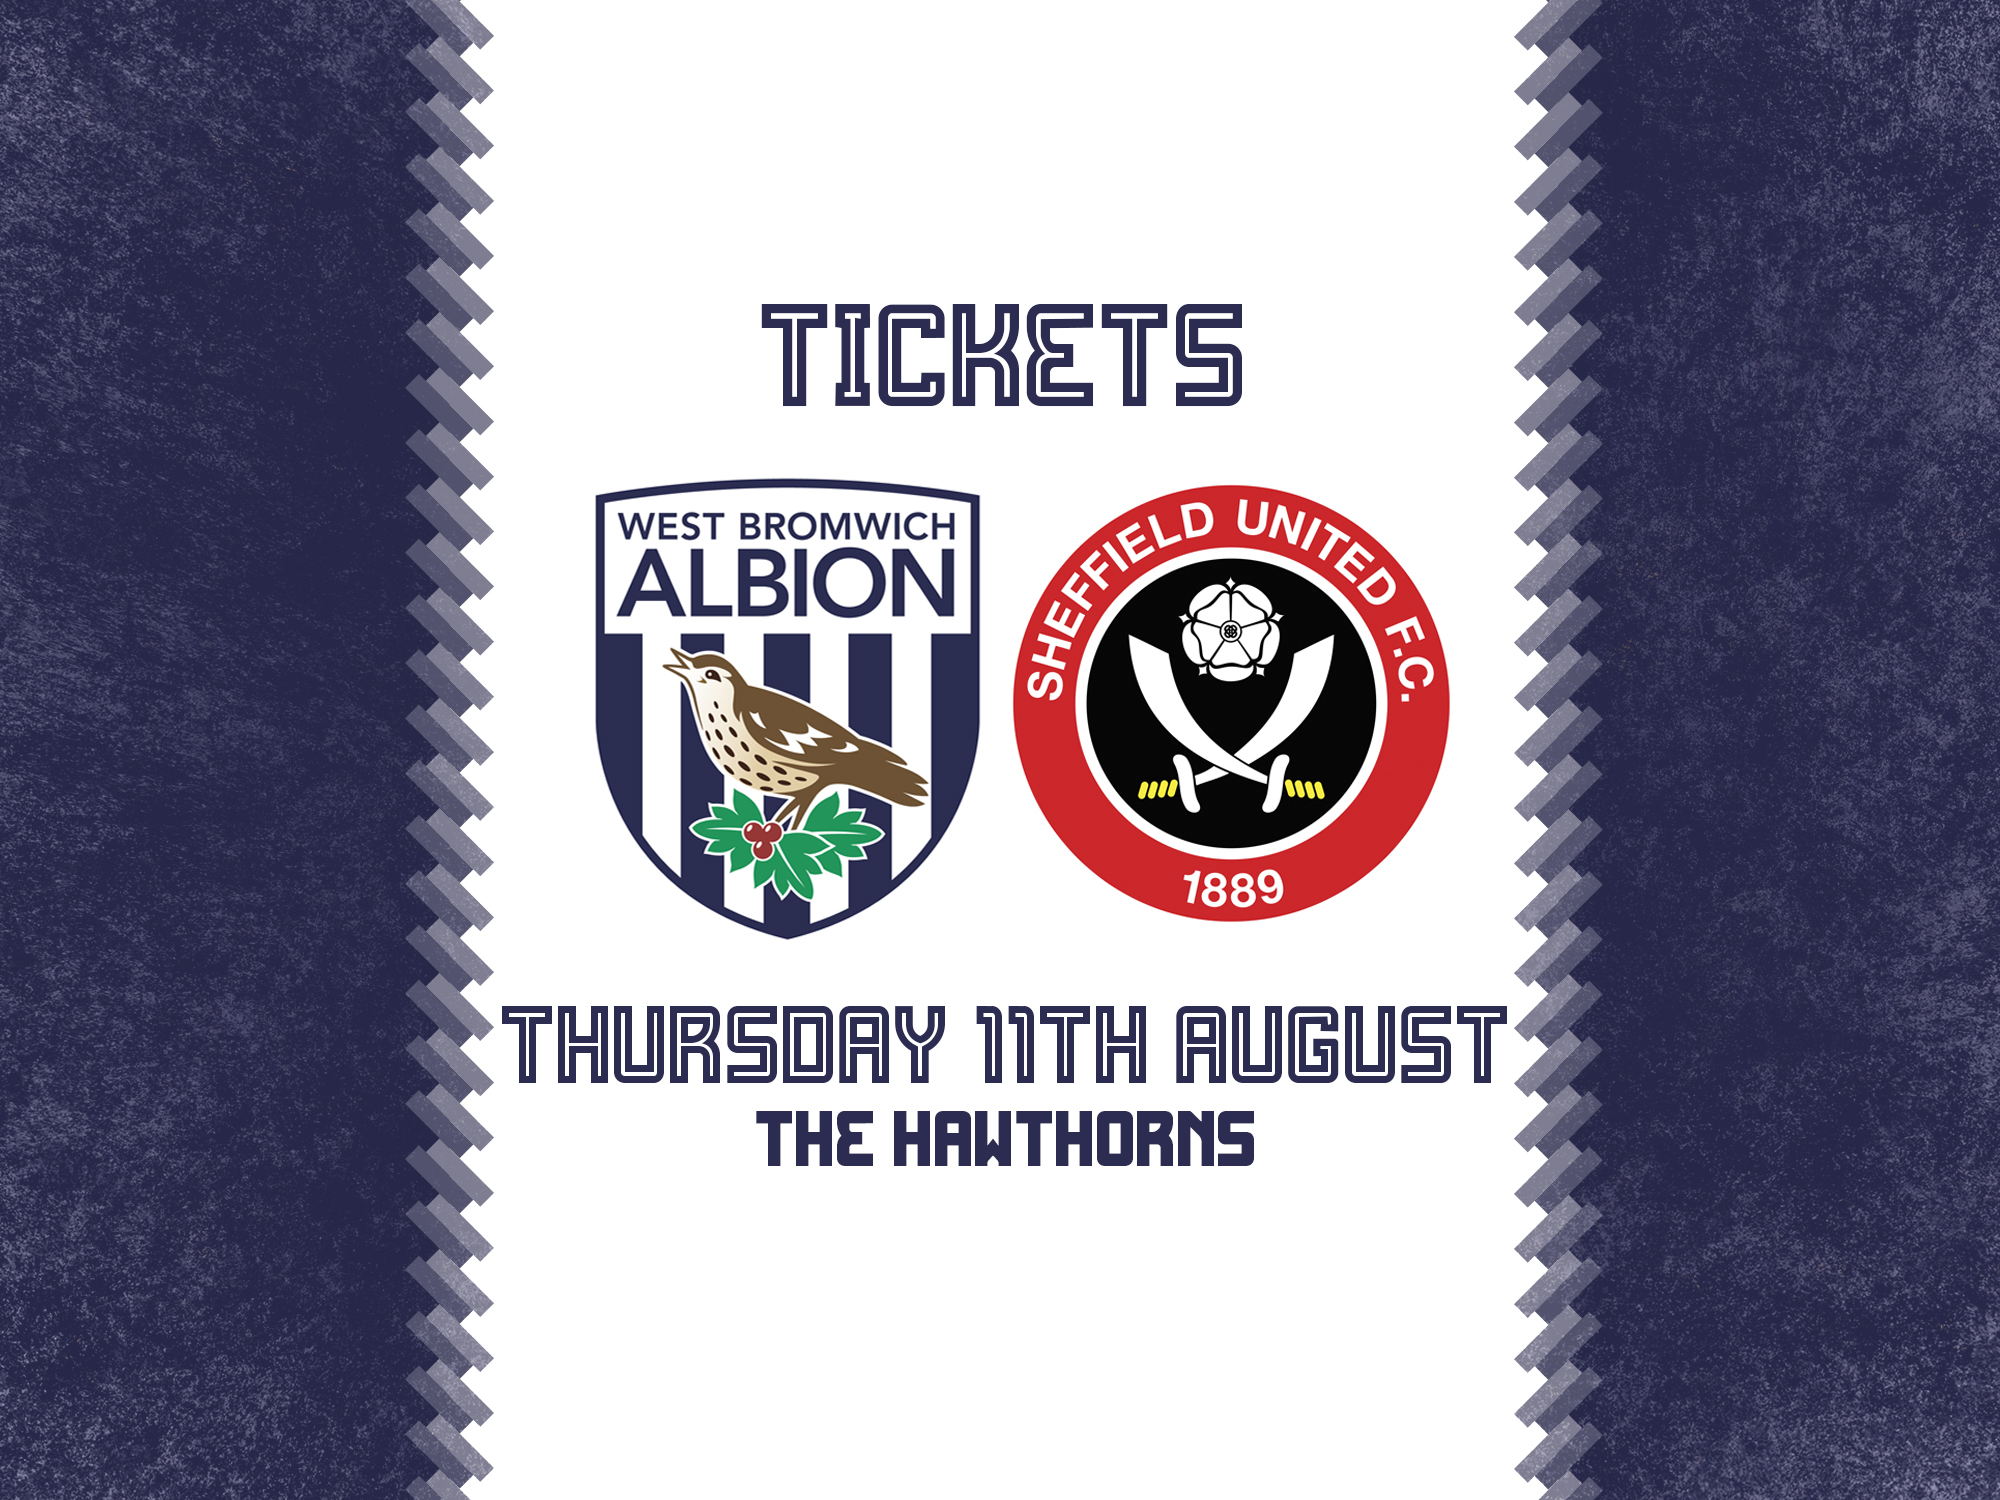 Tickets are now on sale for Albion's cup game against Sheffield United